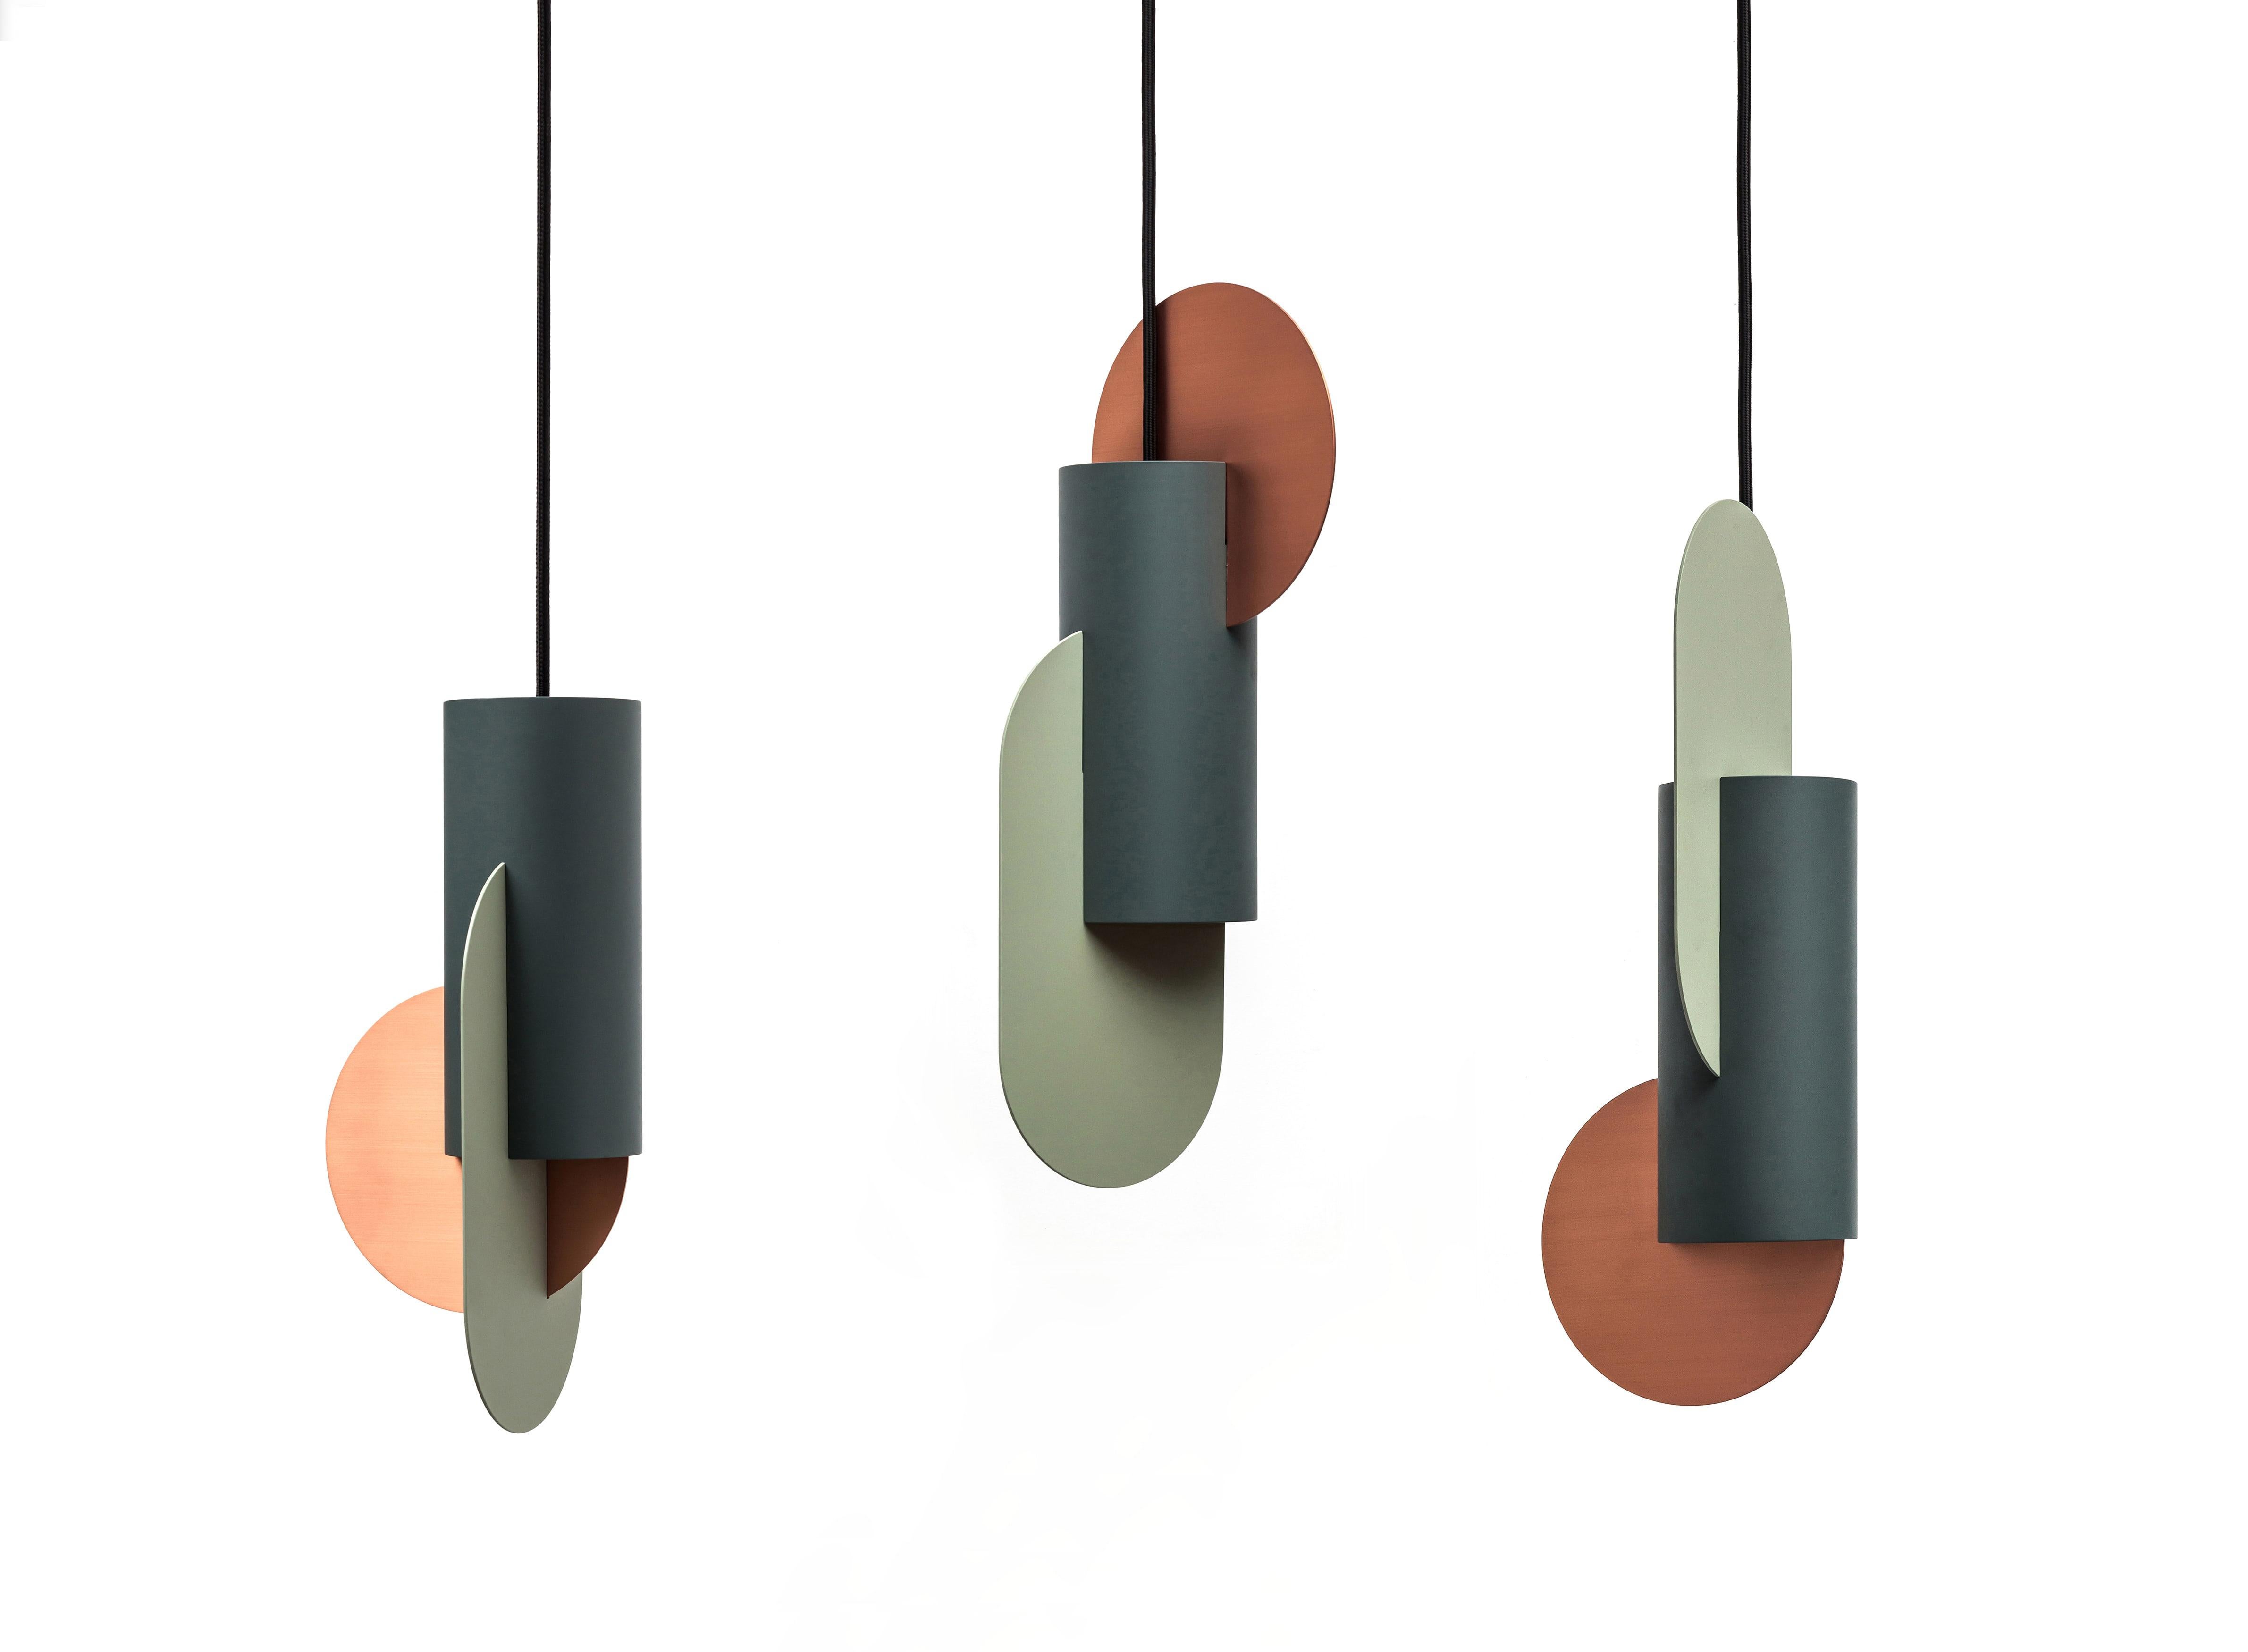 Ukrainian Set of Three Contemporary Pendant Lamps Suprematic by NOOM in Copper and Steel